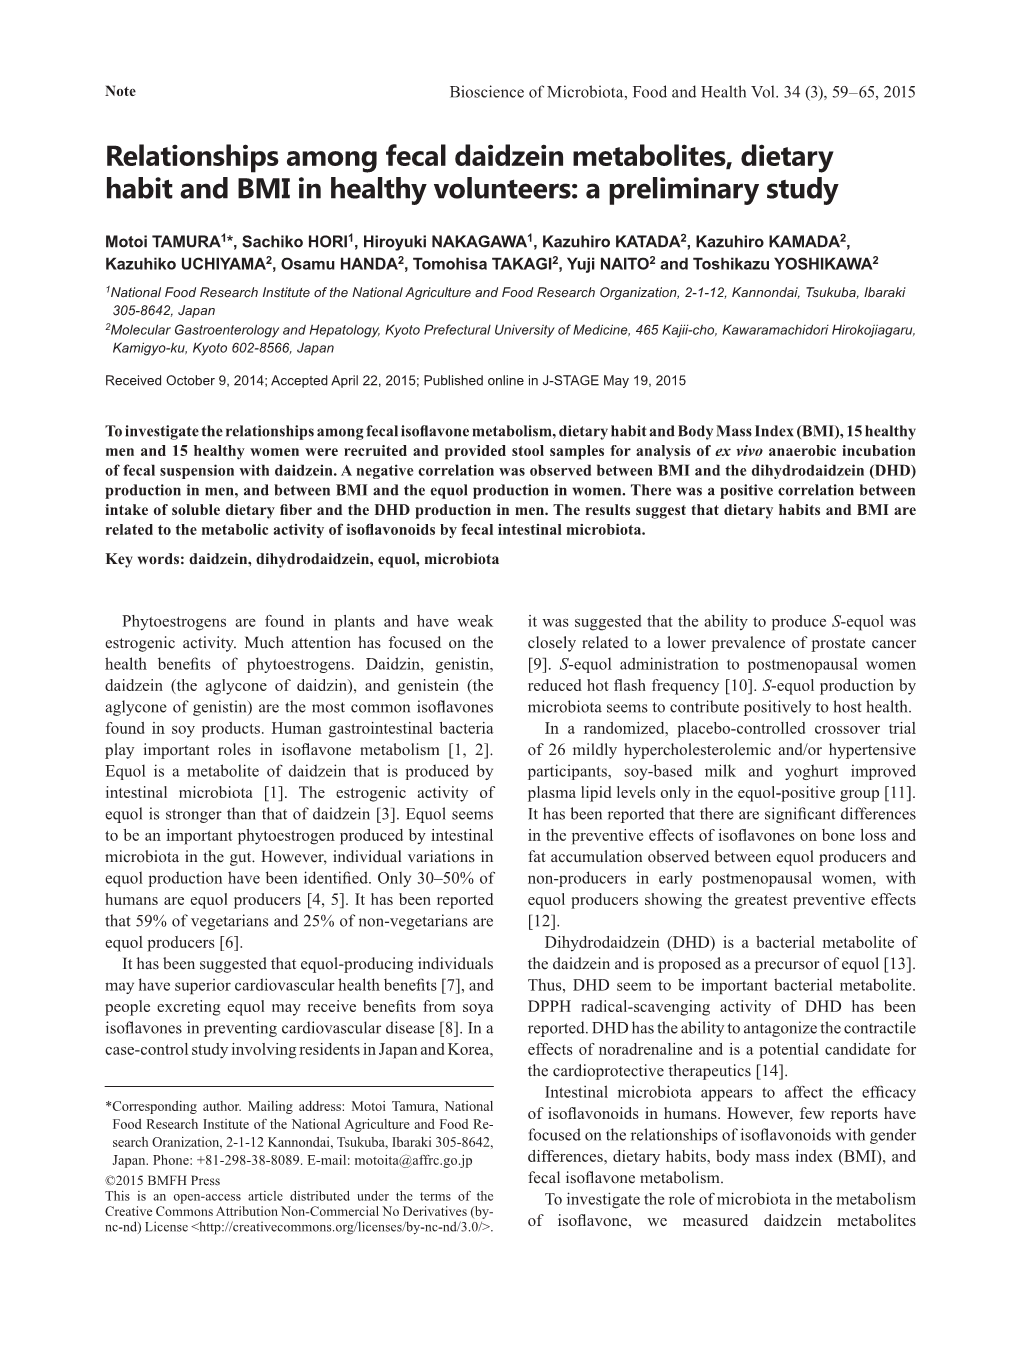 Relationships Among Fecal Daidzein Metabolites, Dietary Habit and BMI in Healthy Volunteers: a Preliminary Study